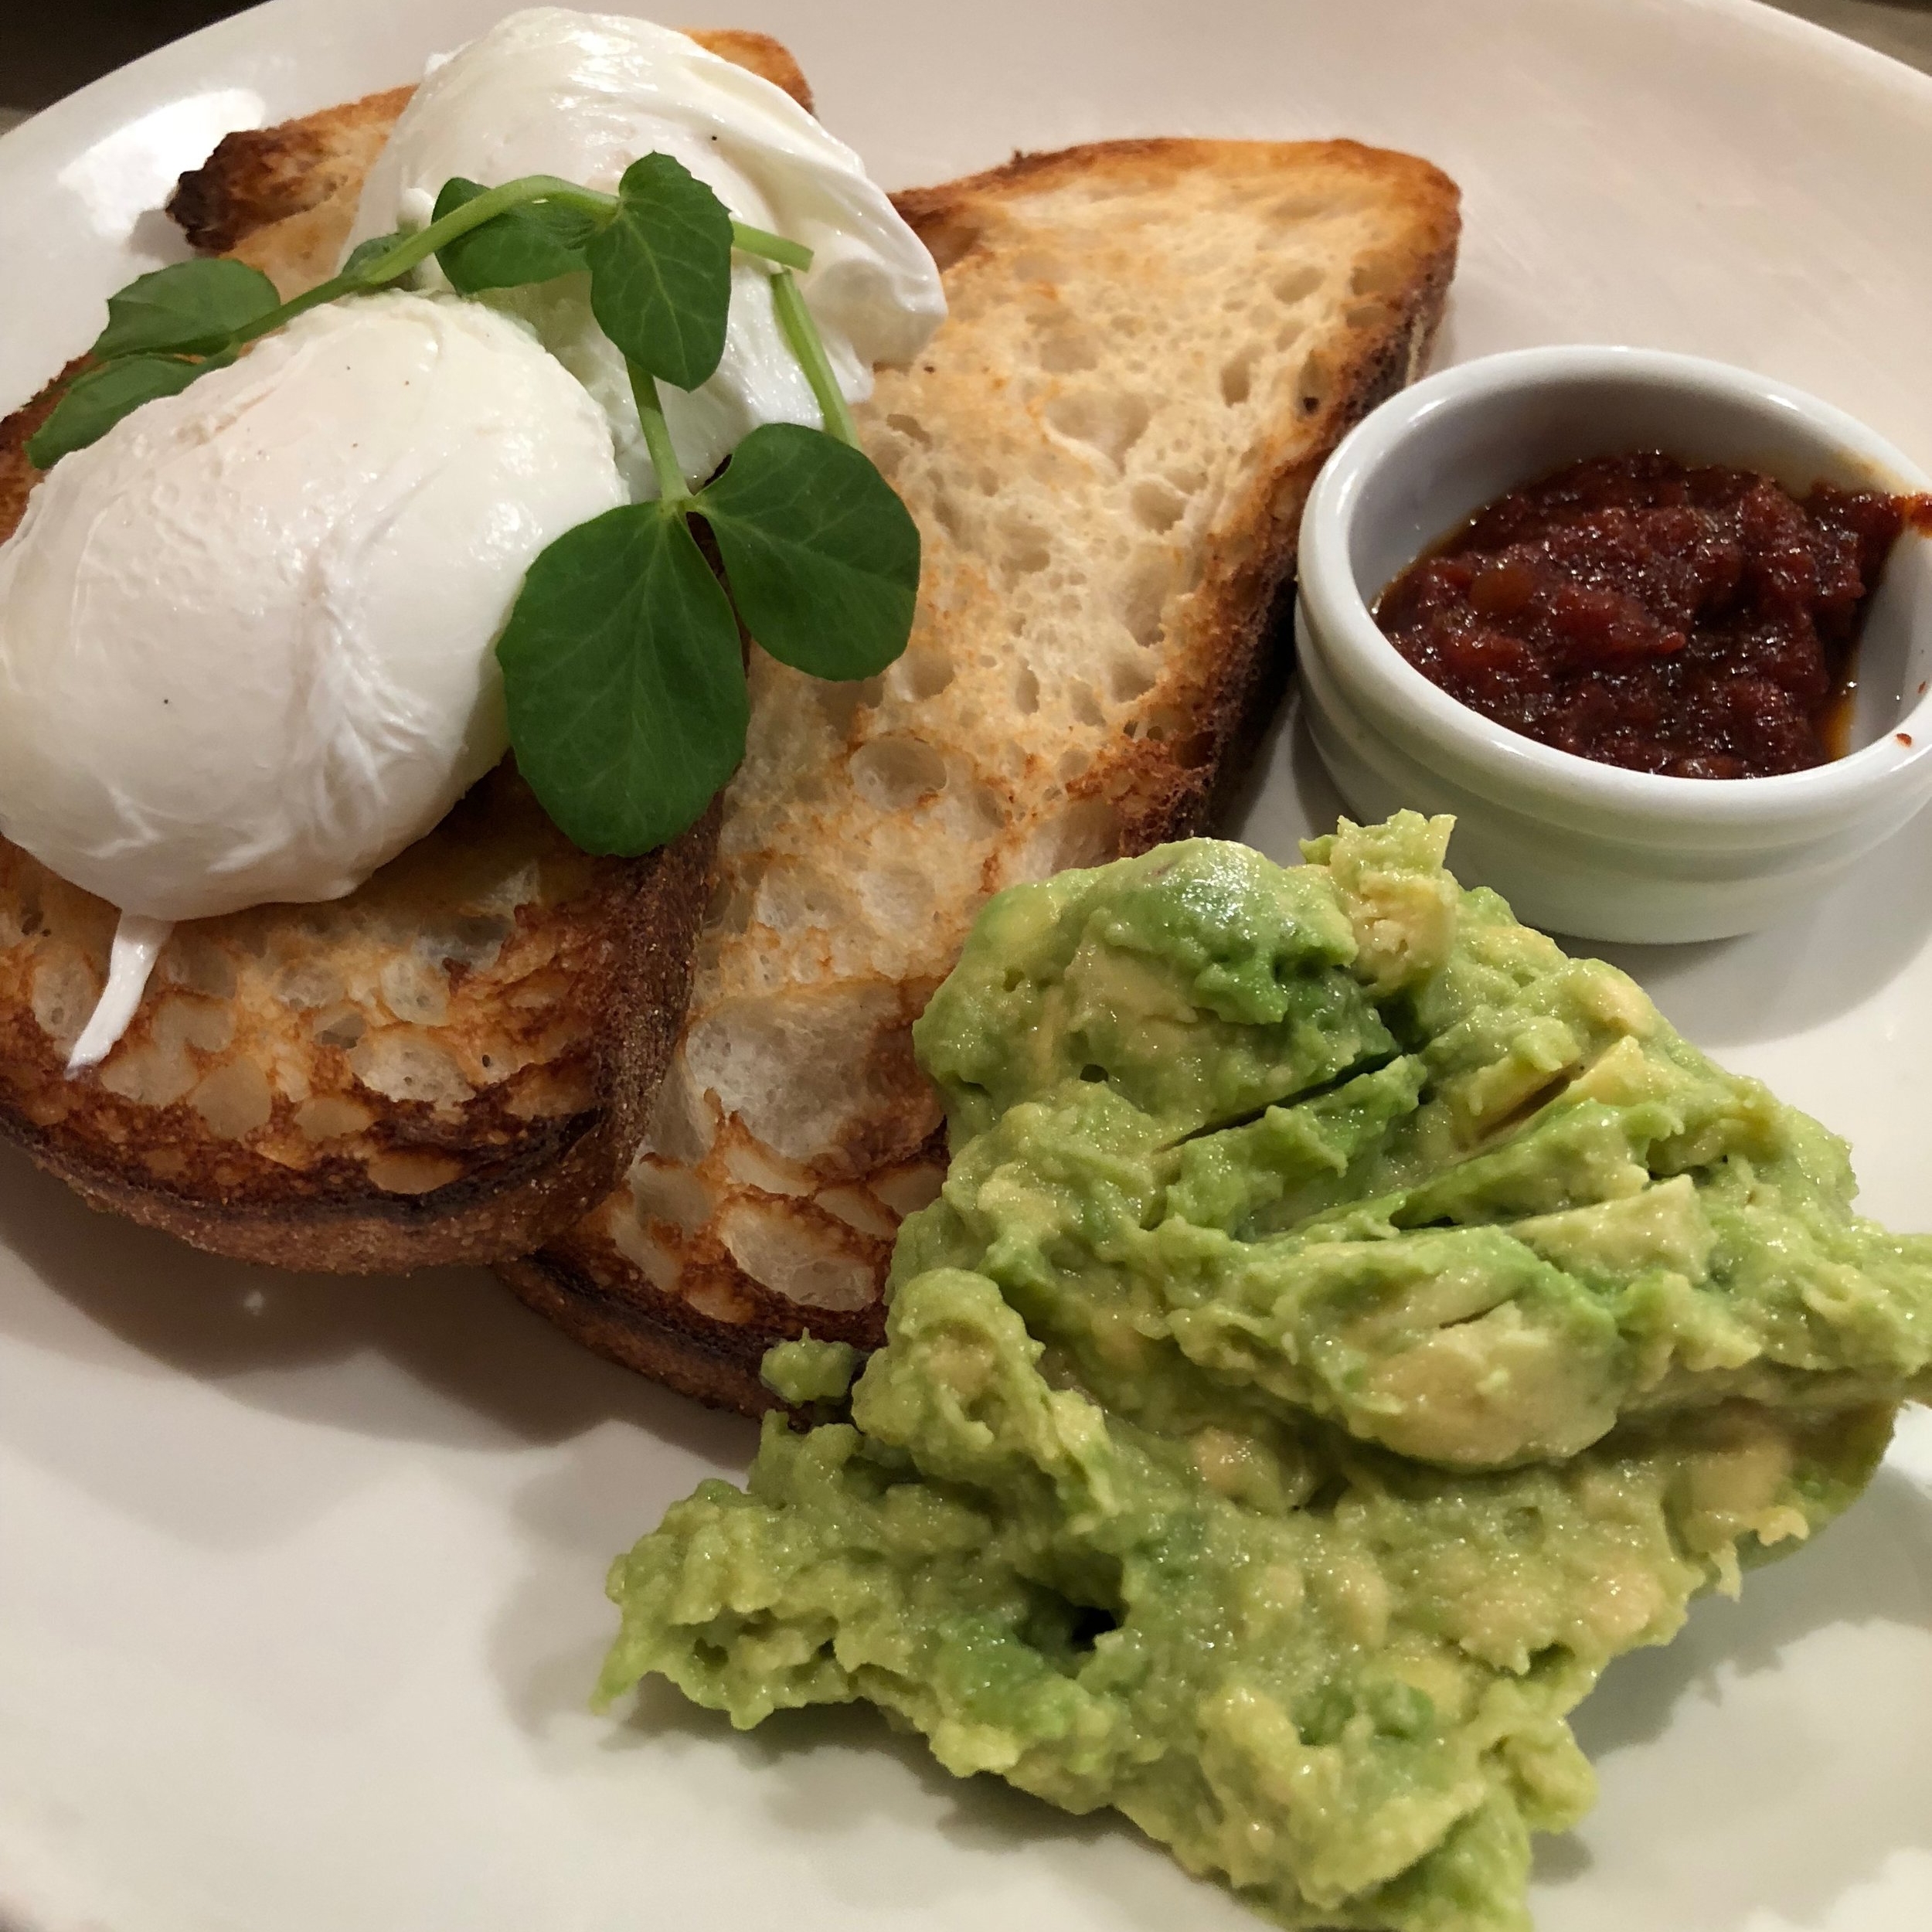 Poached eggs and smashed avocado